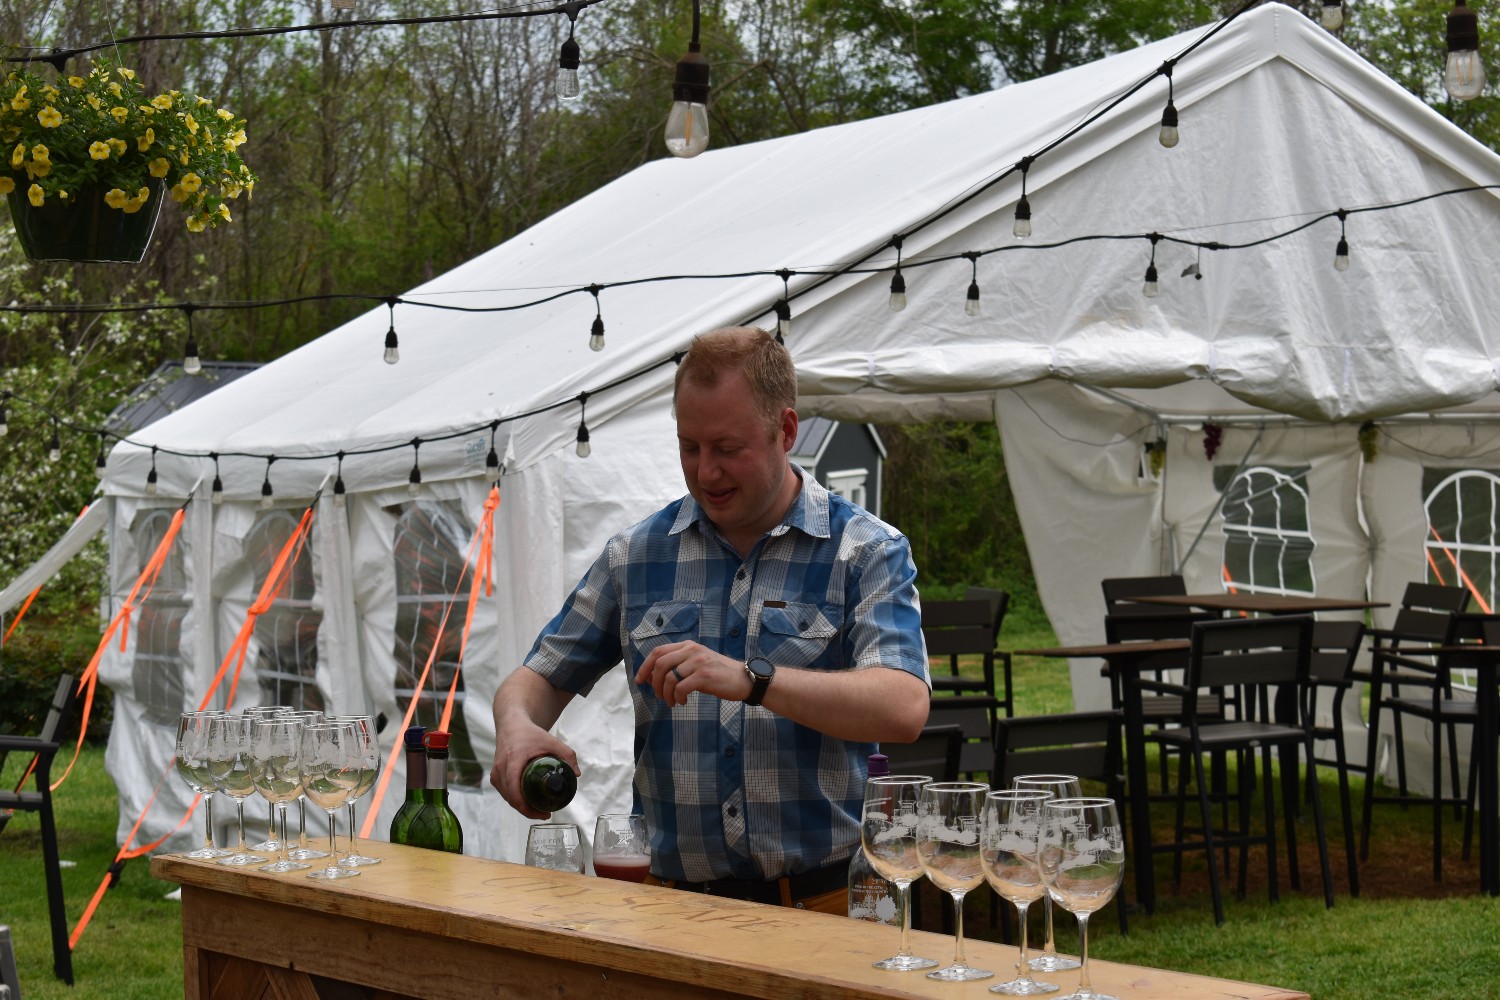 CityScape winery grew to a 33,000 bottle operation in 2017 after an eclipse-viewing event hosted onsite along with other events. (Photo/Molly Hulsey)